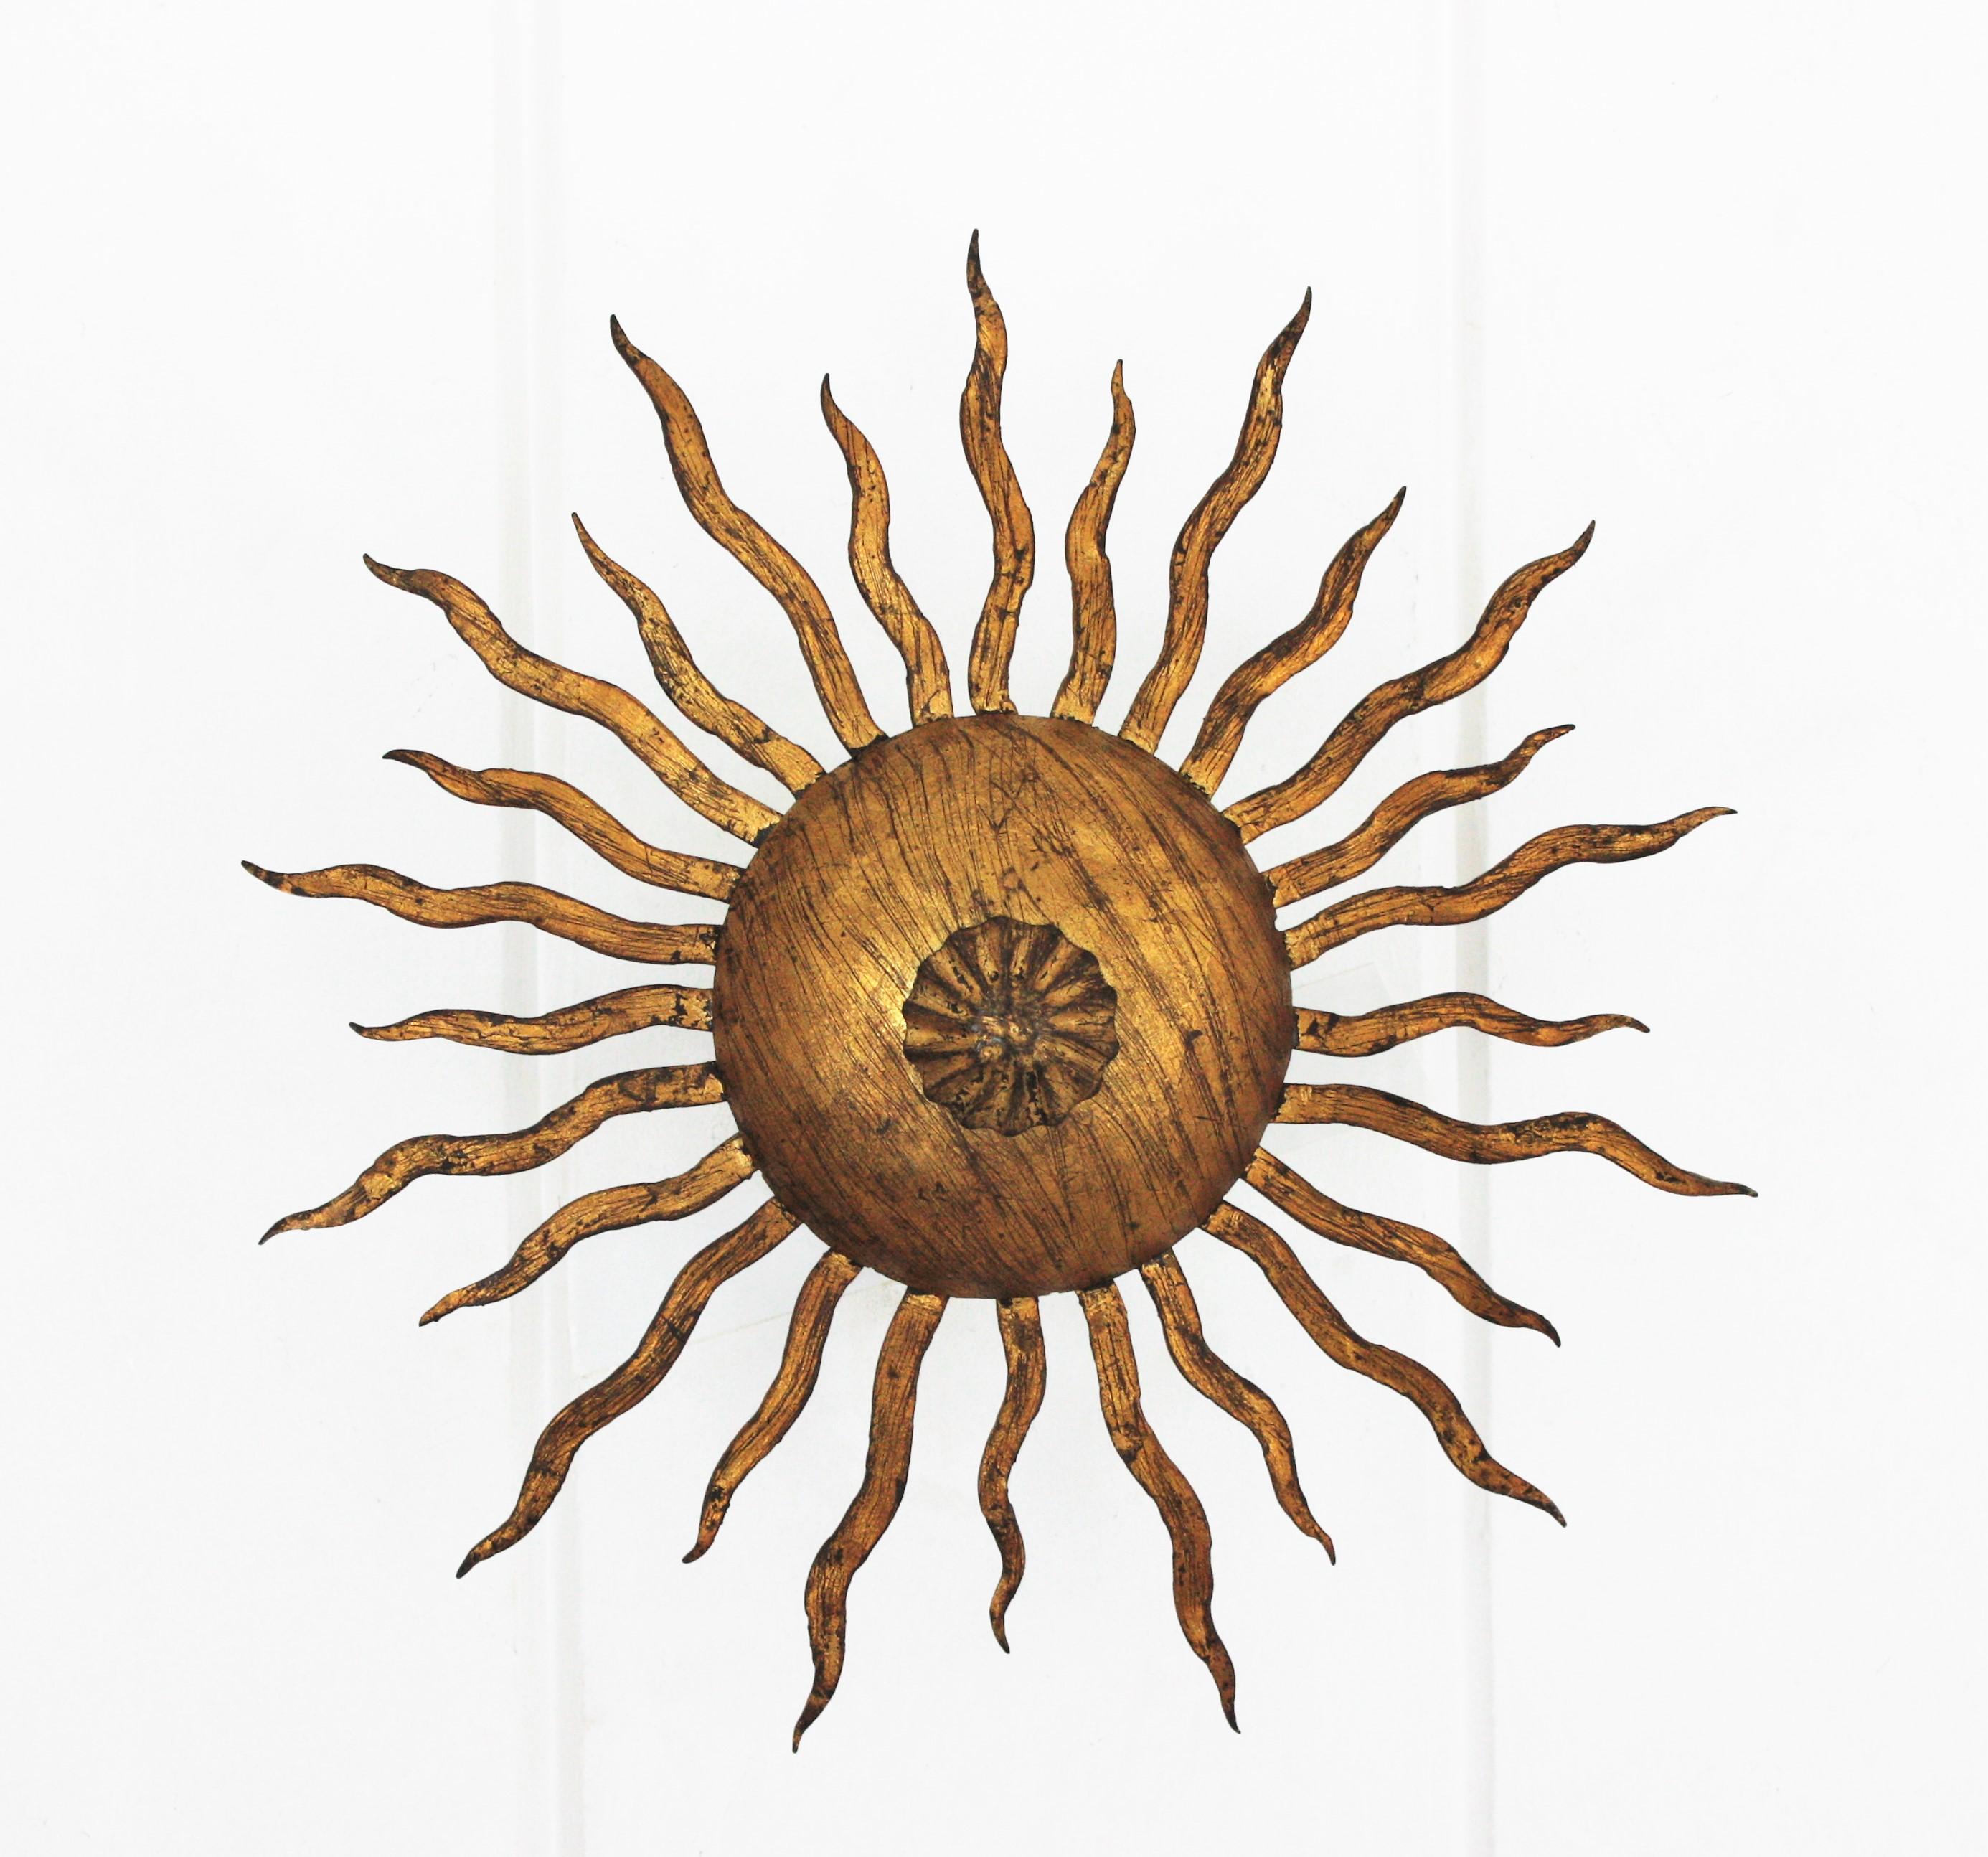 Wrought gilt hand forged iron sunburst flushmount ceiling lamp or light fixture. France, 1950s.
This hand-hammered iron flushmount has alternating rays in two sizes surrounding the central sphere and a flower decoration at the central part.
This